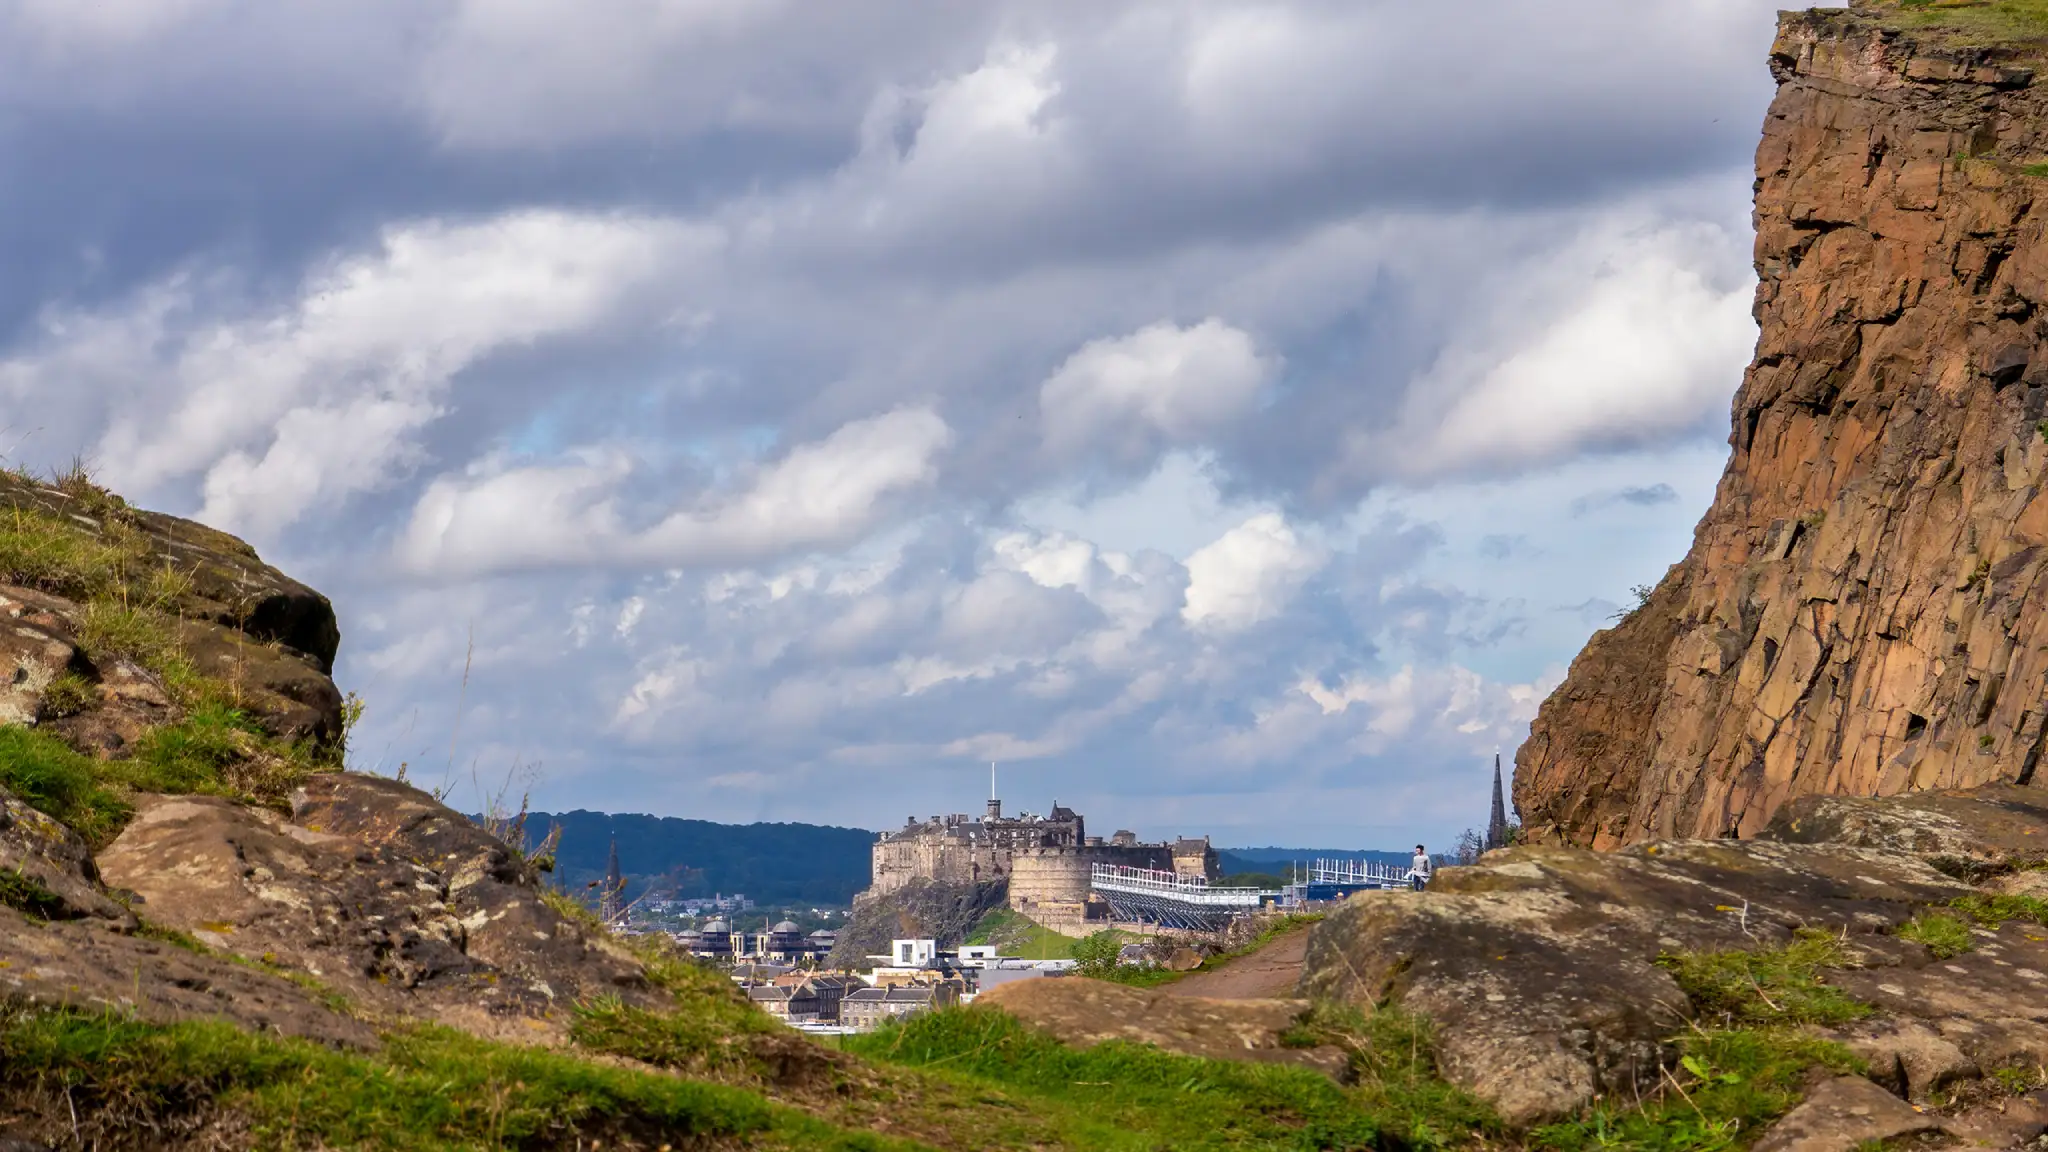 A dramatic view of a castle, mountains, and clouds around Arthur's Seat in Edinburgh, Scotland.